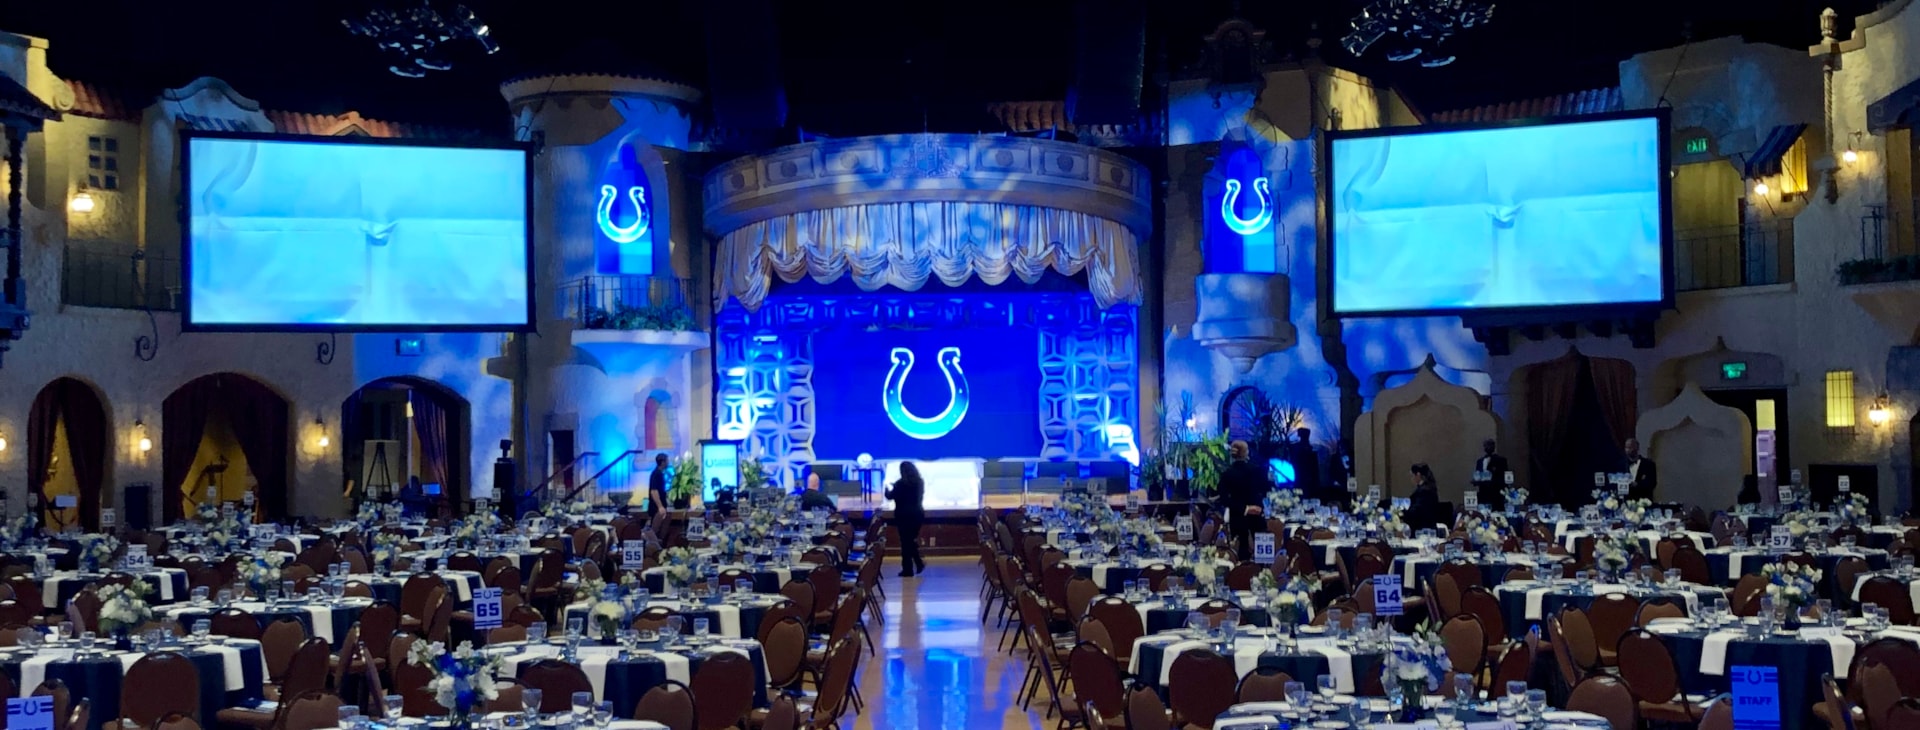 Indianapolis Colts corporate event for 750 people at the Indiana Roof Ballroom and Event Center